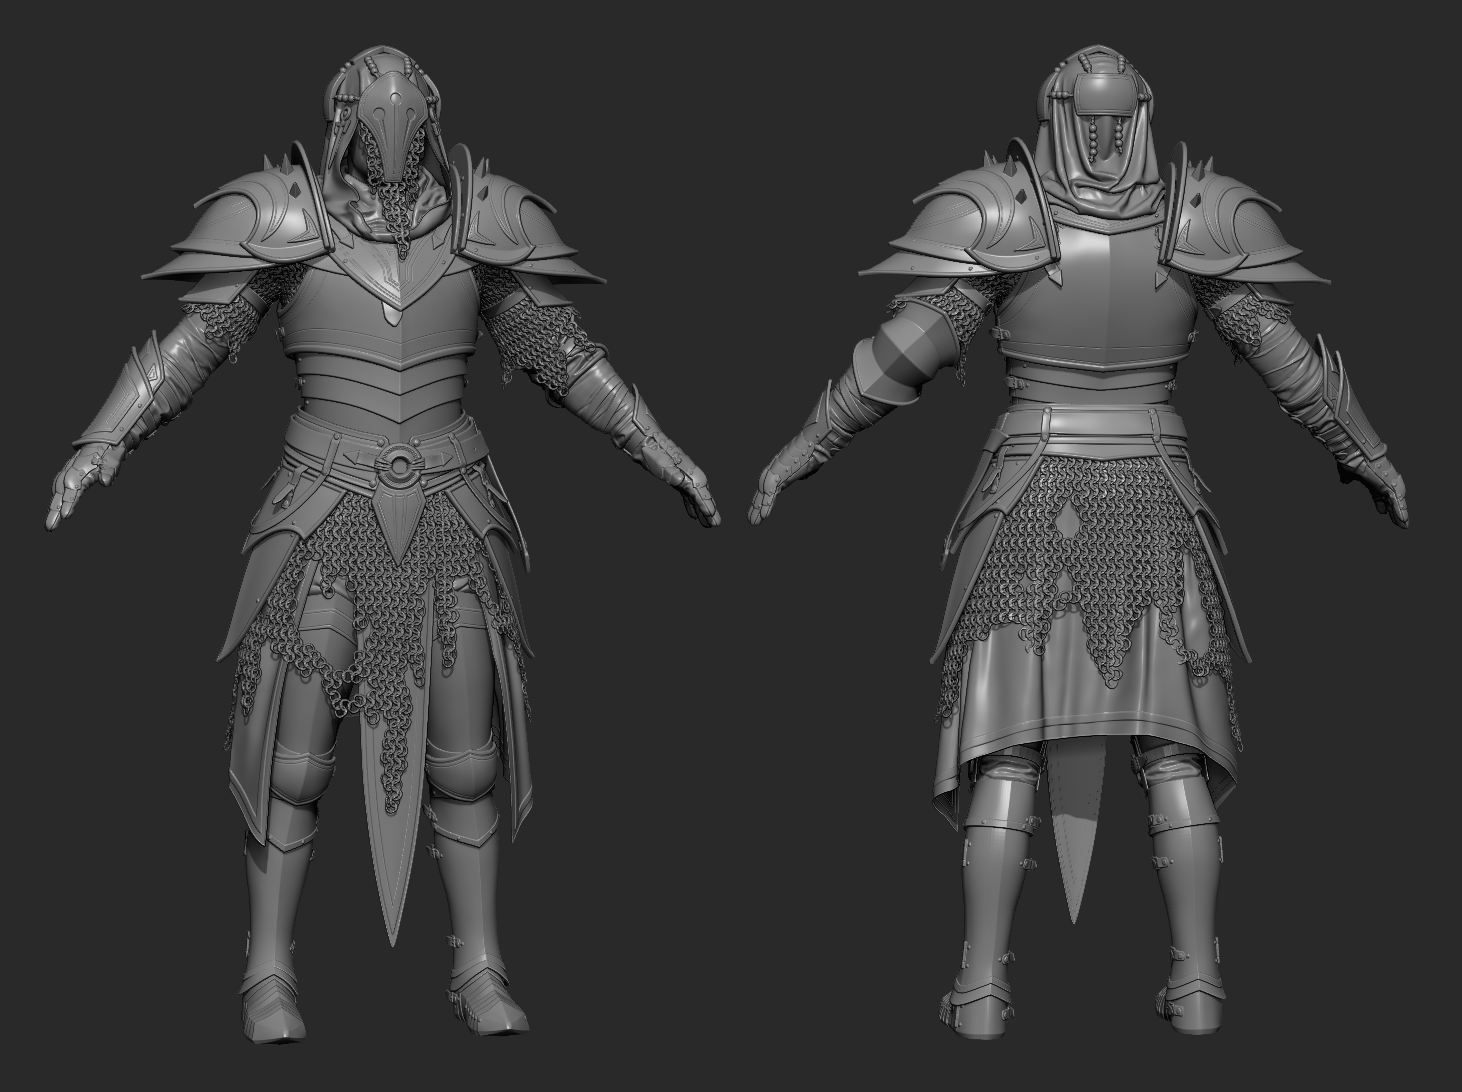 Characters created in Zbrush 